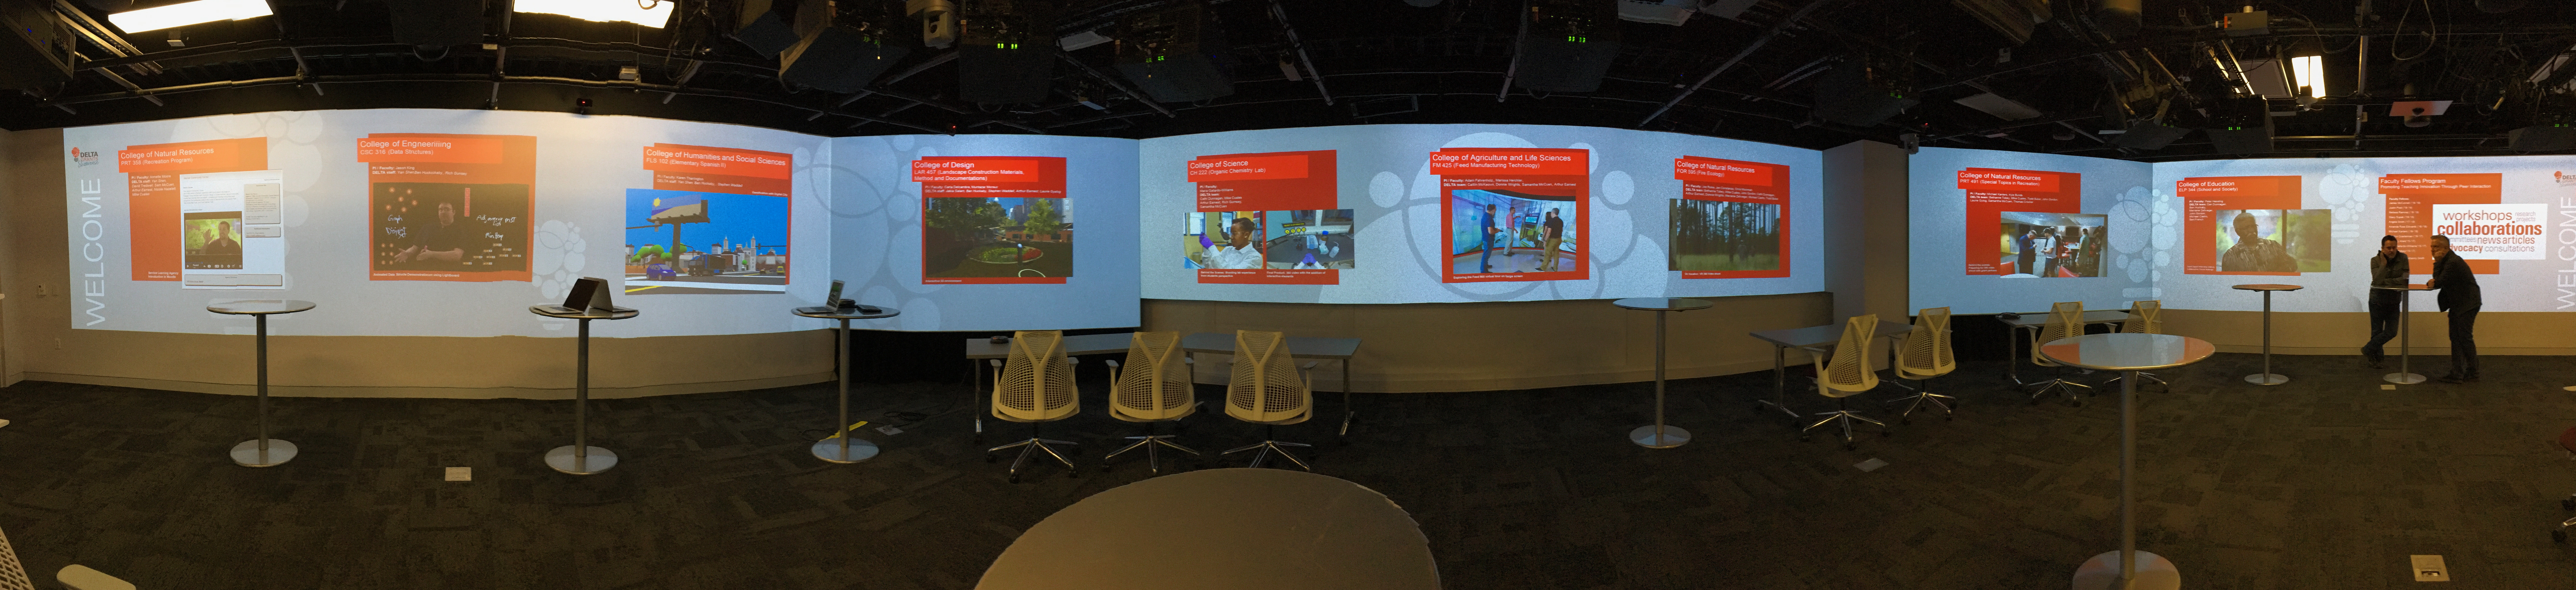 presentation screens in the Hunt Teaching and Visualization Lab